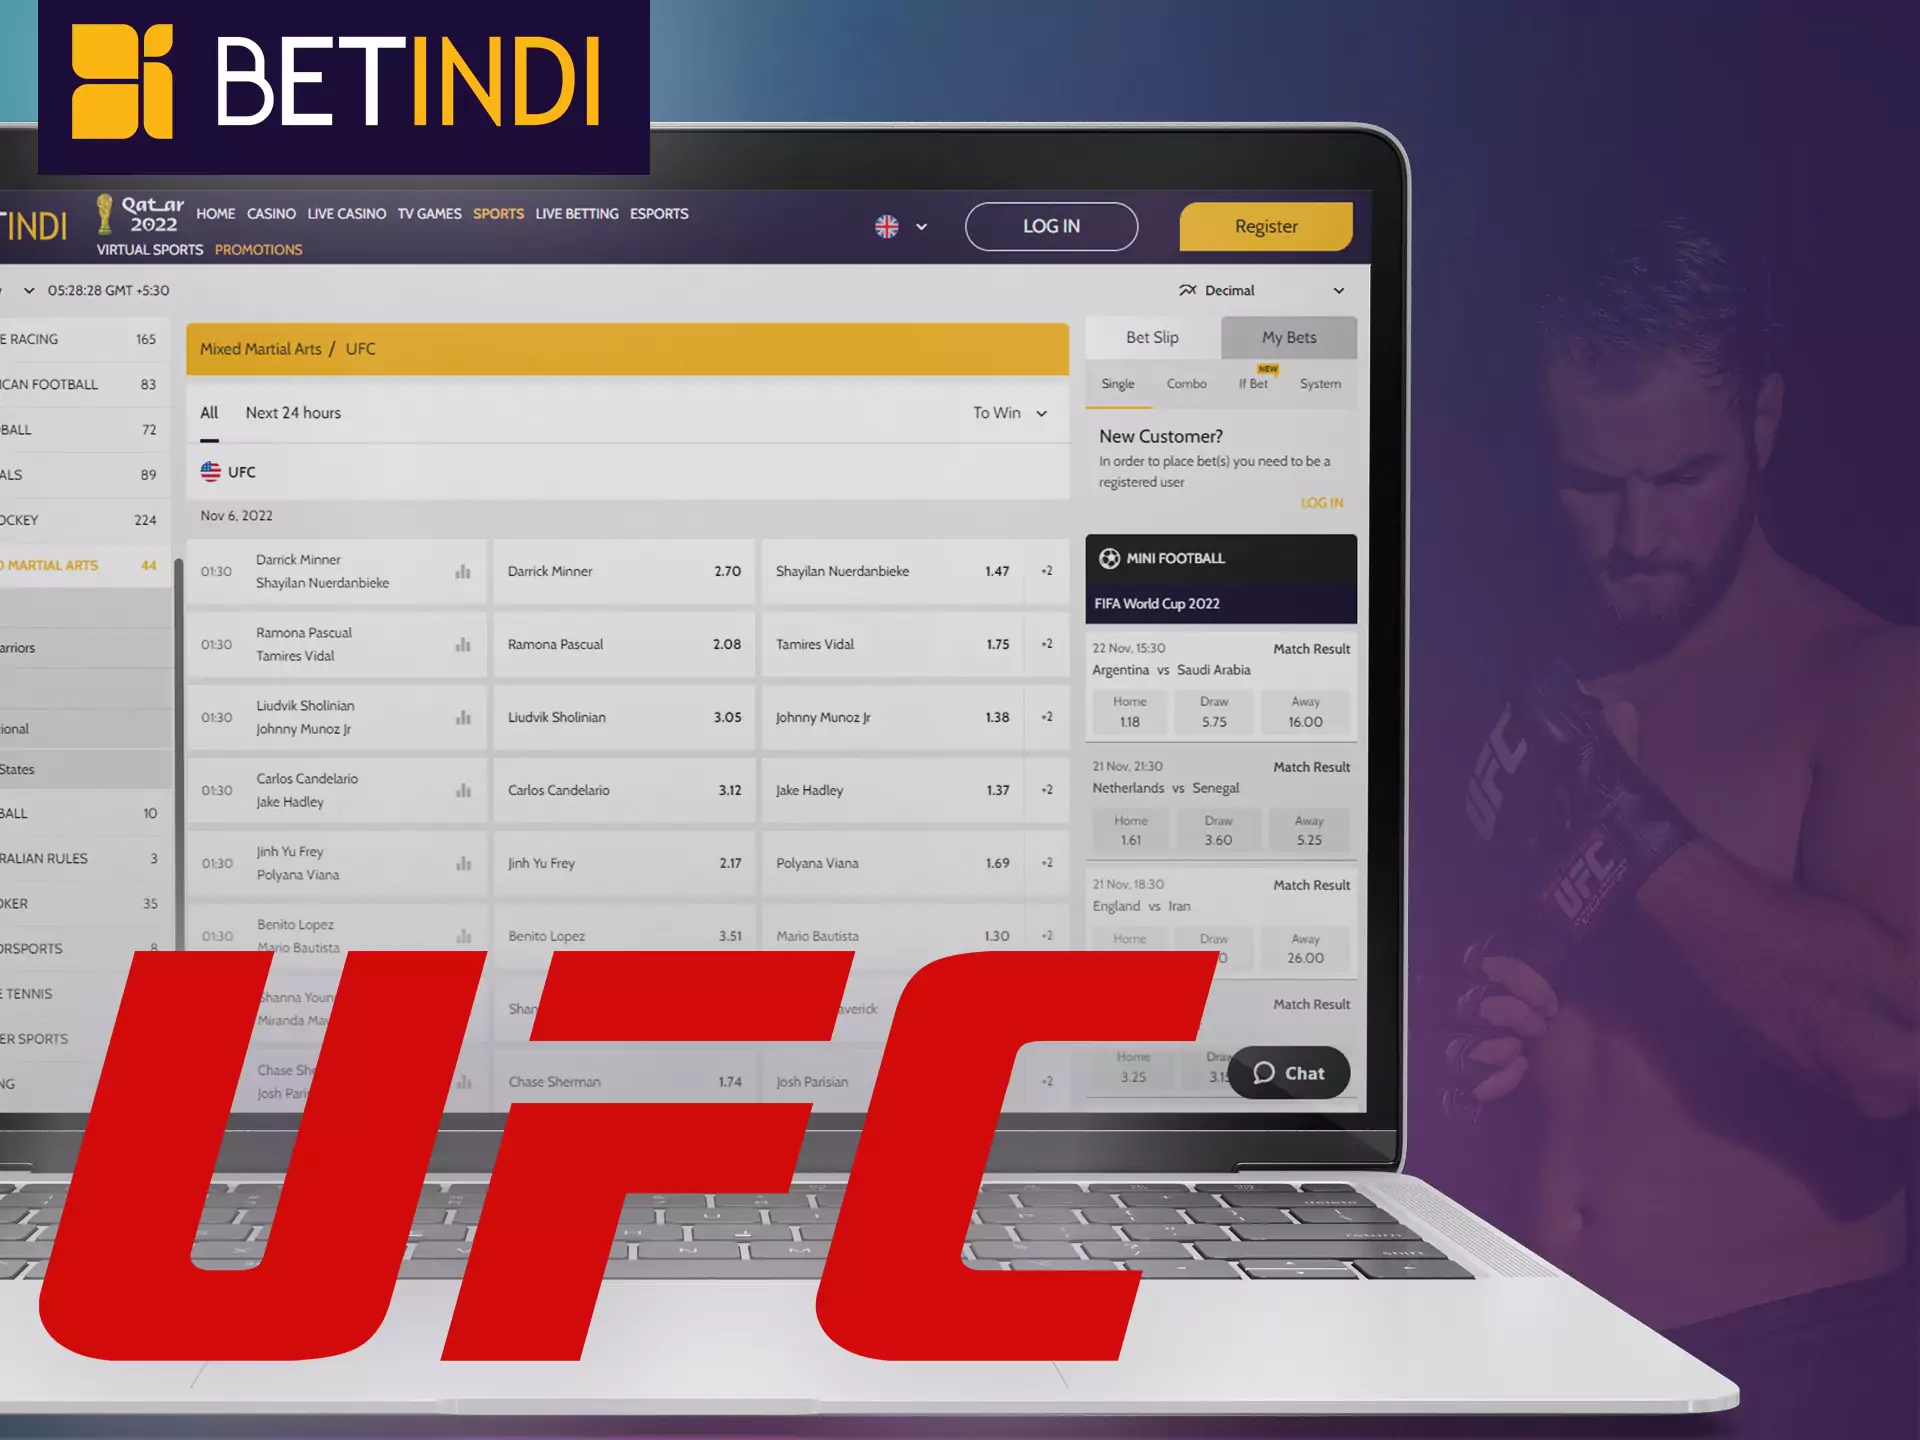 With Betindi, place bets and cheer for your favorite UFС player.